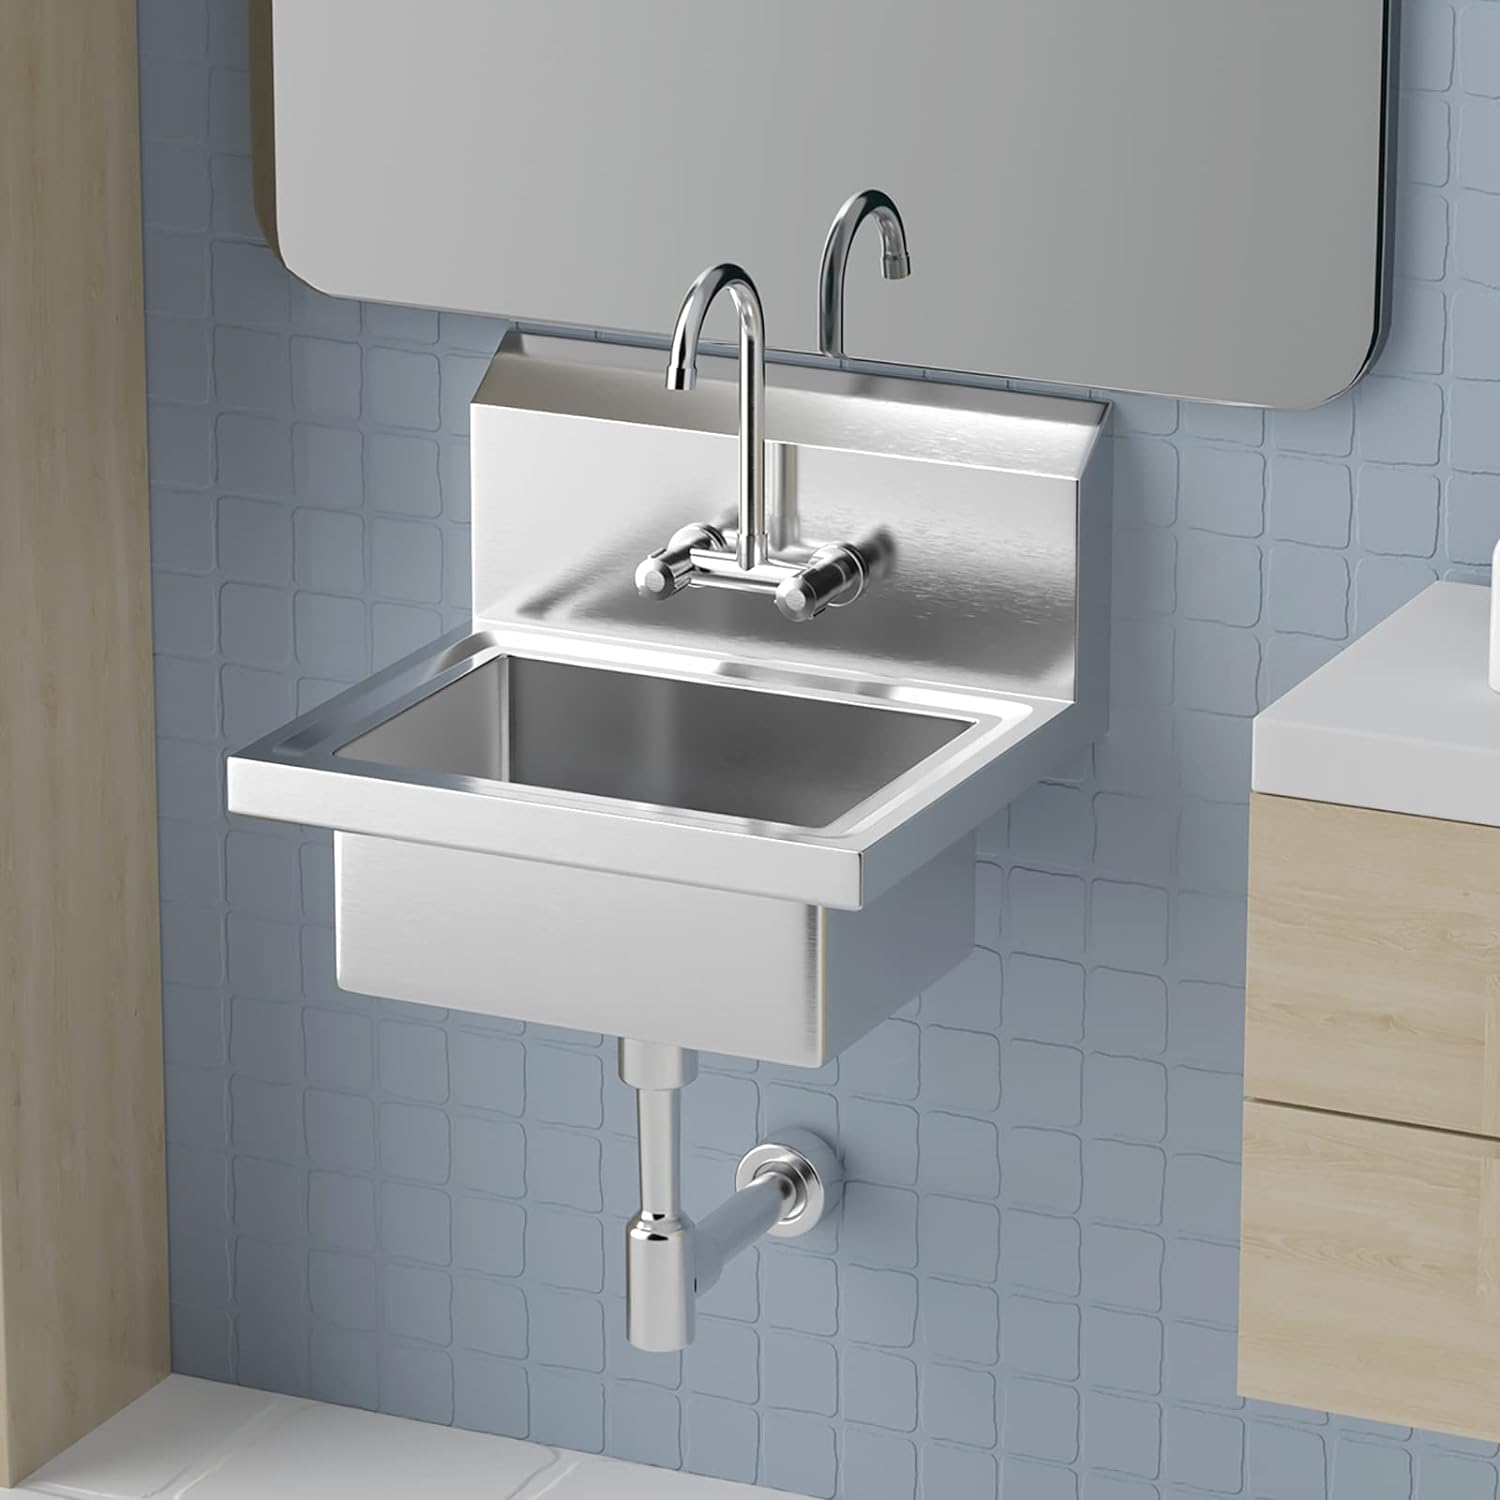 Bonnlo Upgraded Commercial Hand Wash Sink Stainless Steel Prep